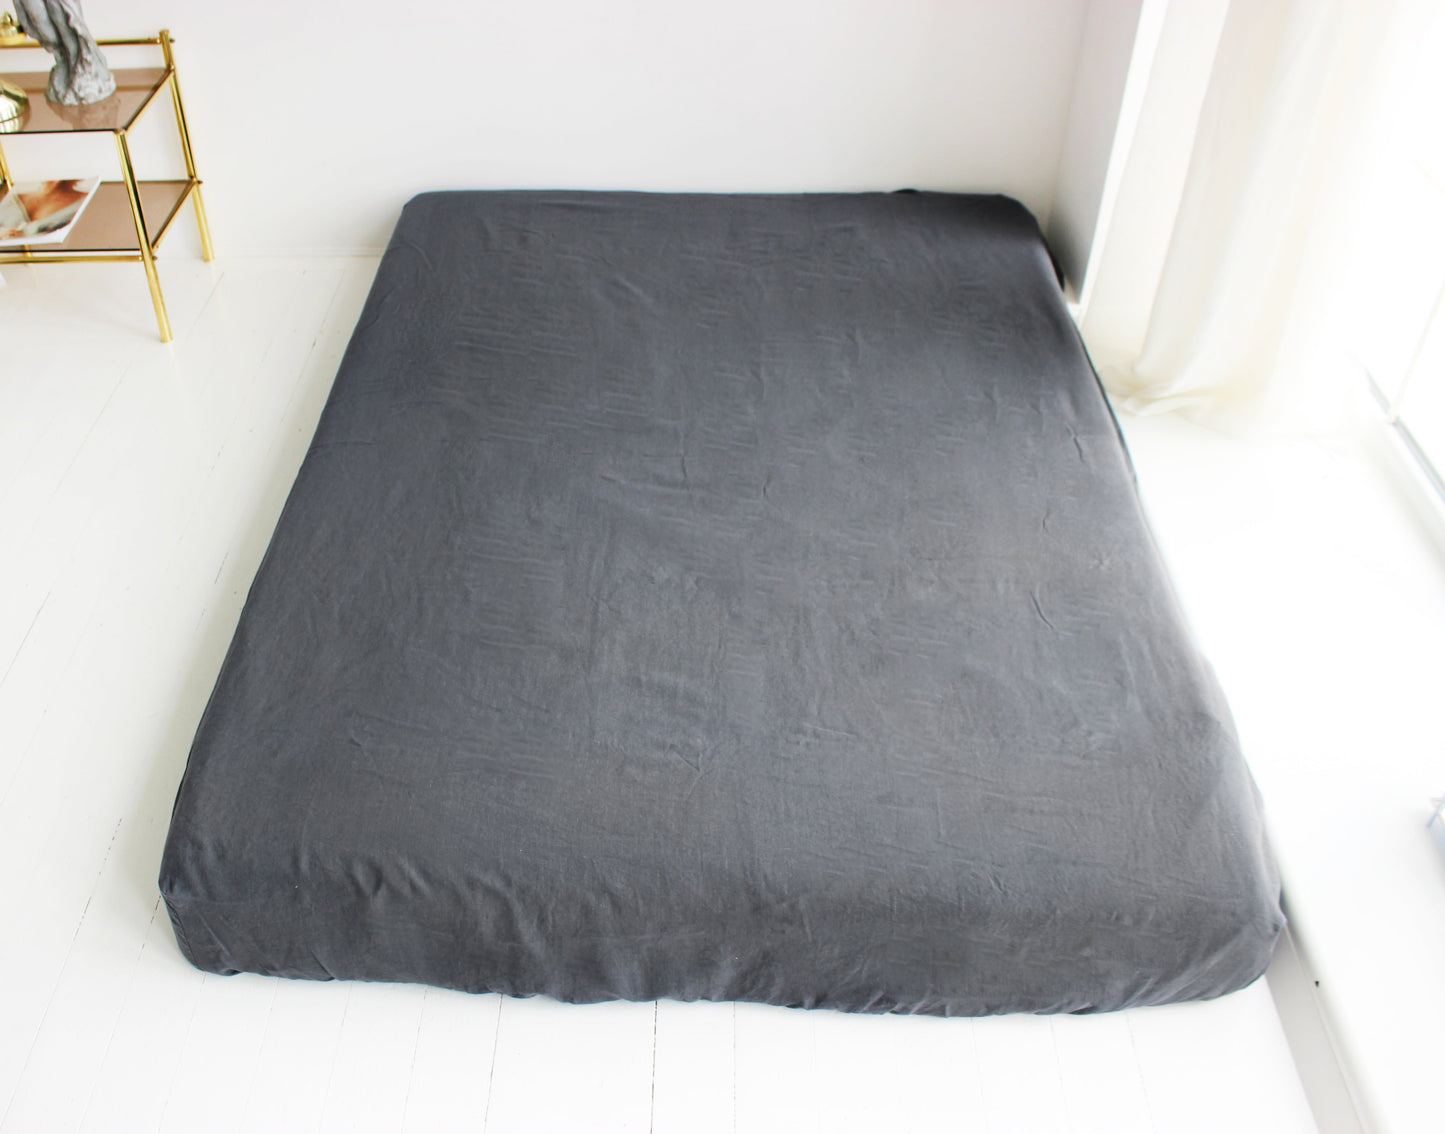 Linen fitted sheet in Full, Queen, King sizes